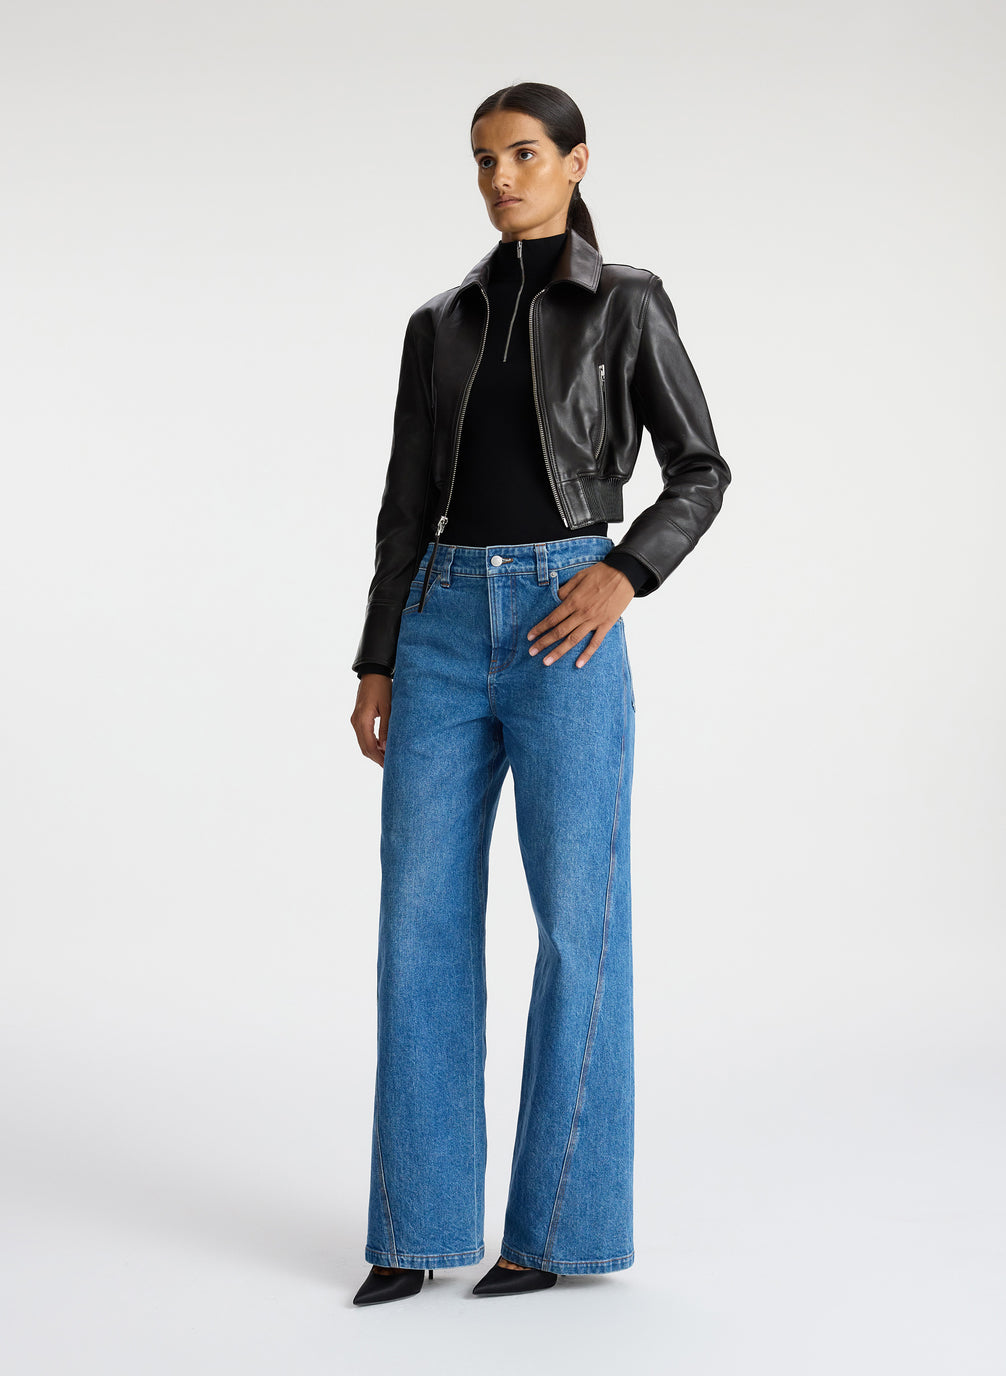 Harlow Cropped Leather Jacket